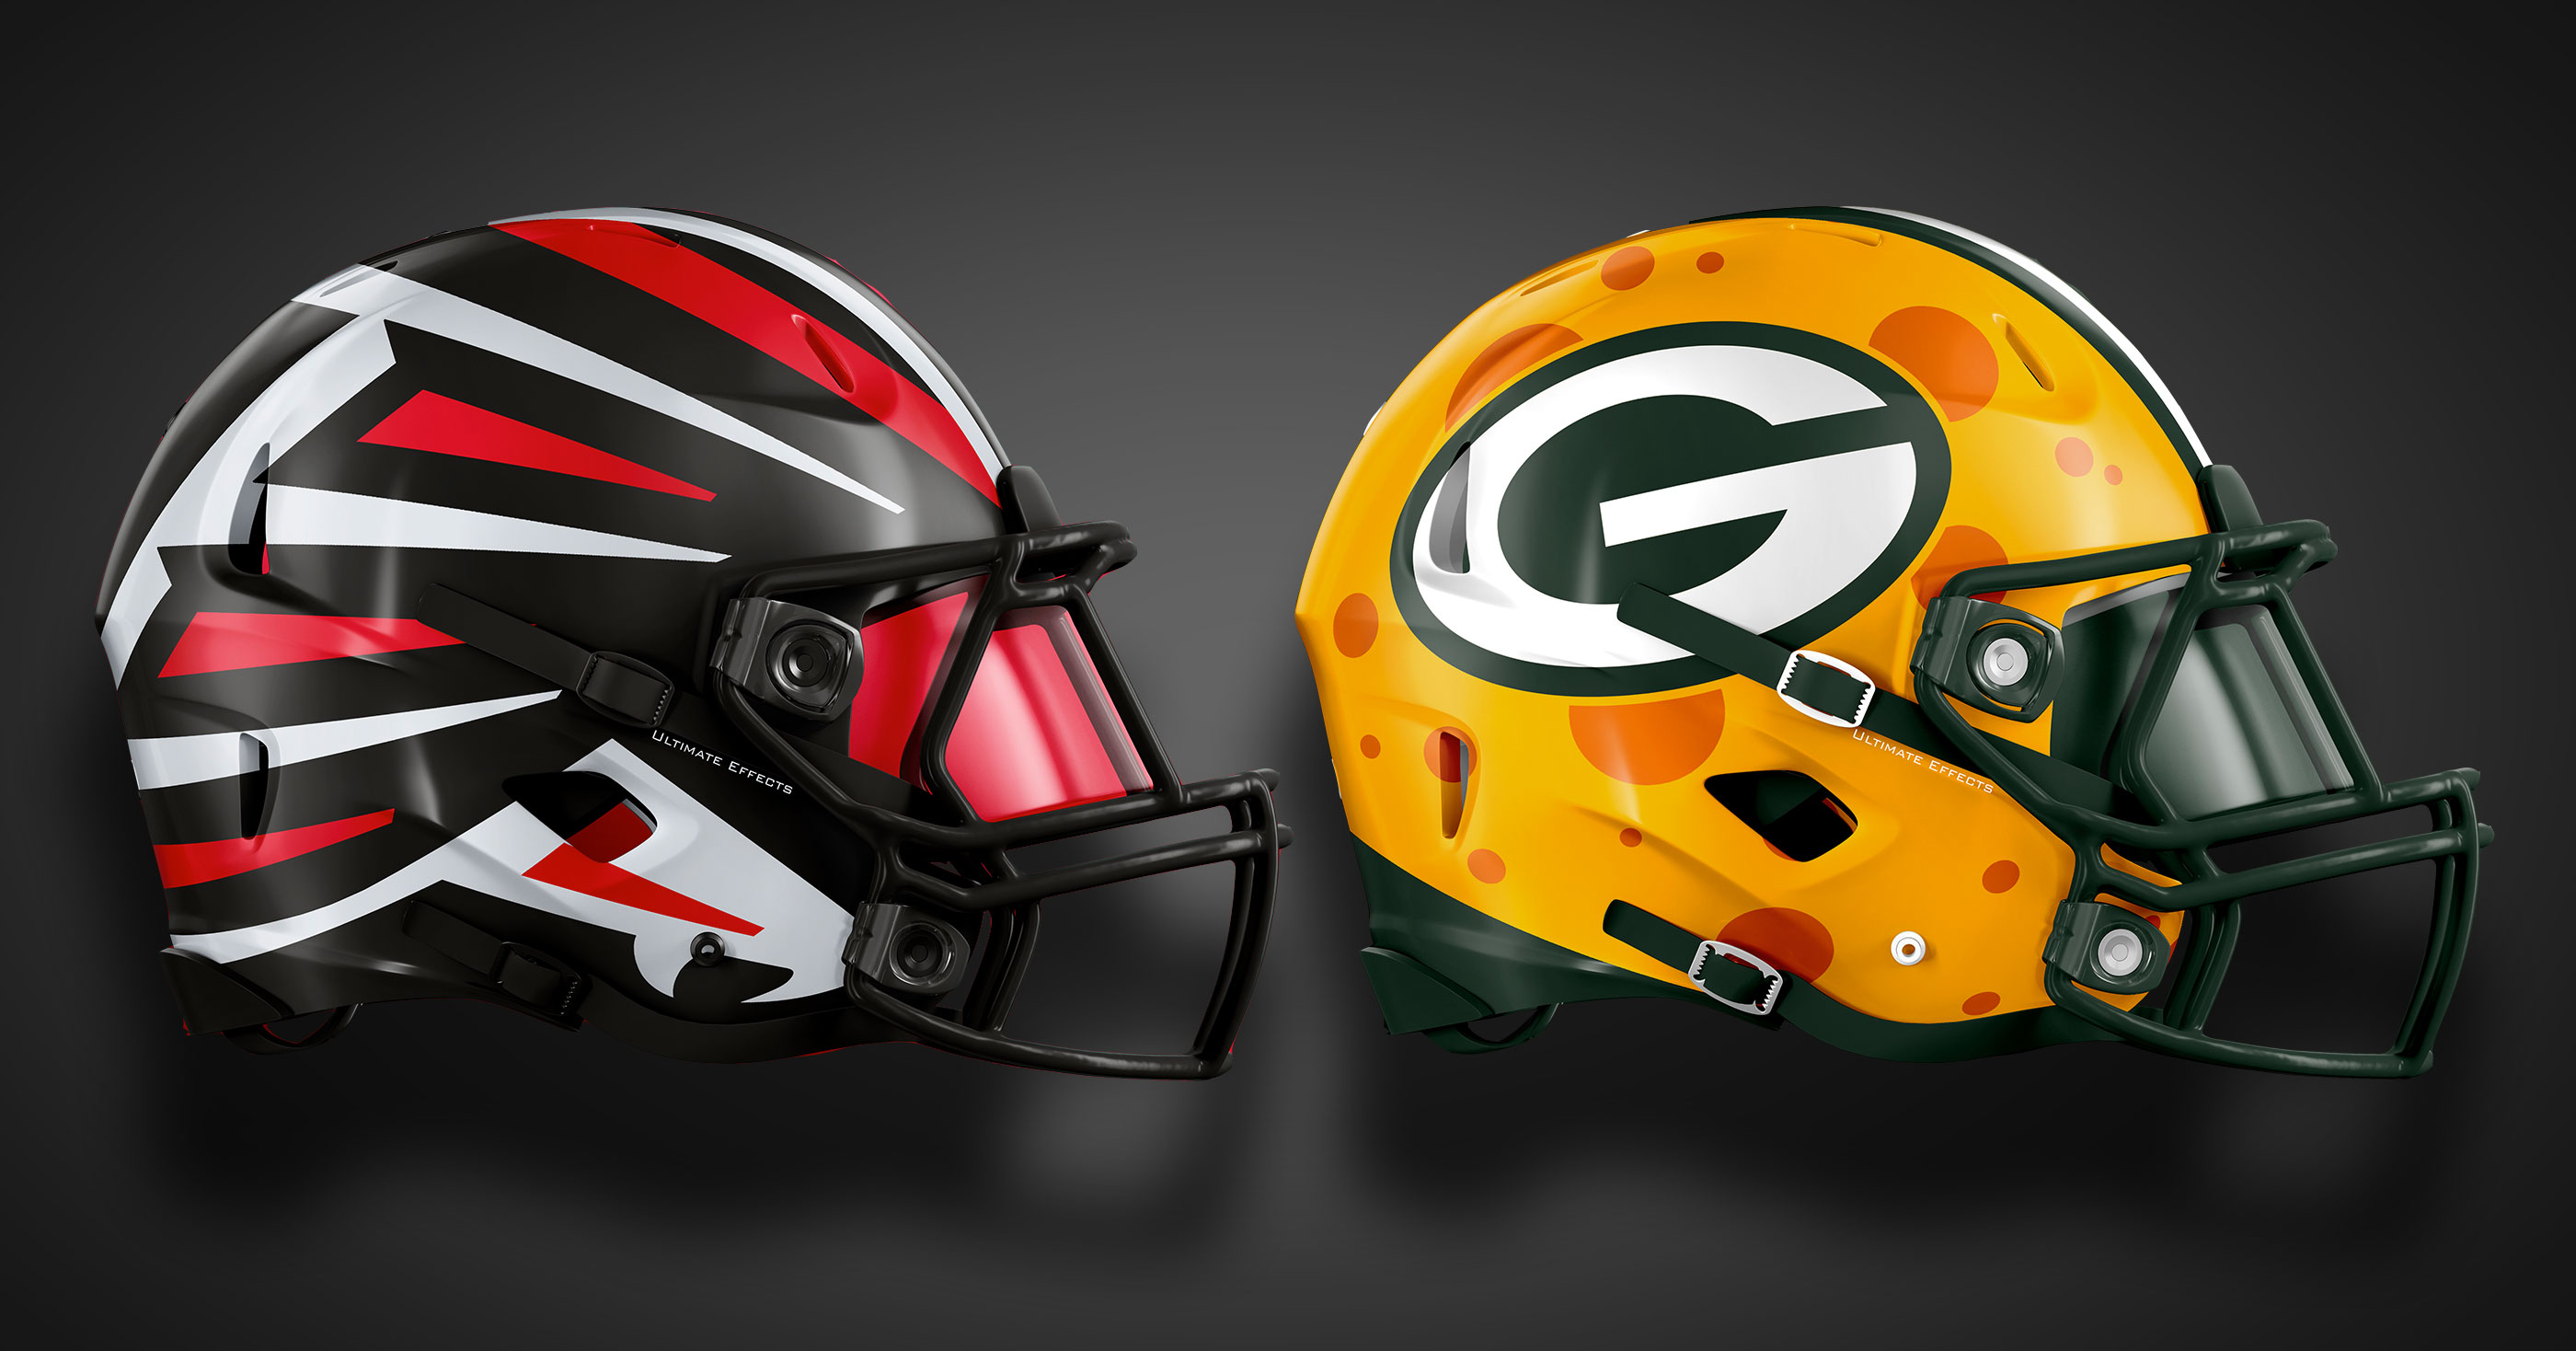 designer-creates-awesome-concept-helmets-for-all-32-nfl-teams-pics